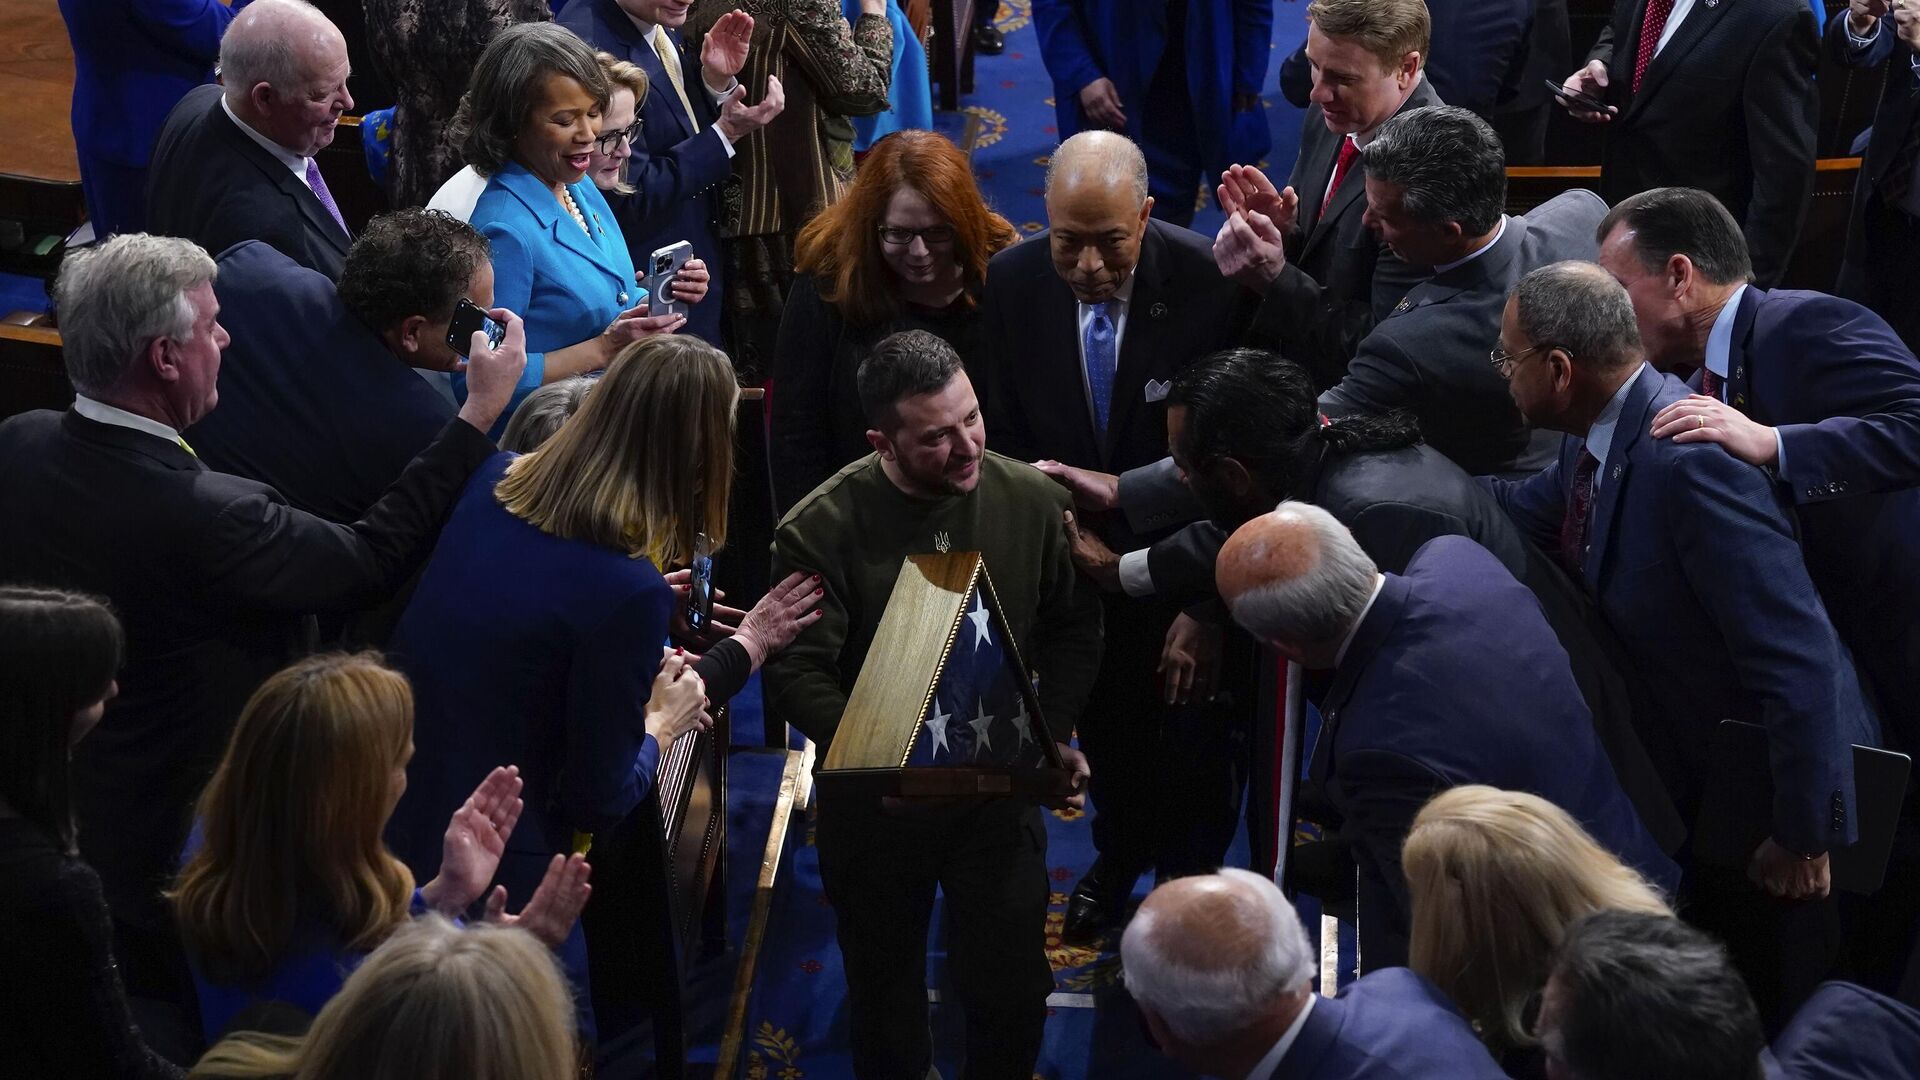 Ukrainian President Volodymyr Zelenskyy holds an American flag that was gifted to him by House Speaker Nancy Pelosi of Calif., as he leaves after addressing a joint meeting of Congress on Capitol Hill in Washington, Wednesday, Dec. 21, 2022. - Sputnik International, 1920, 06.01.2023